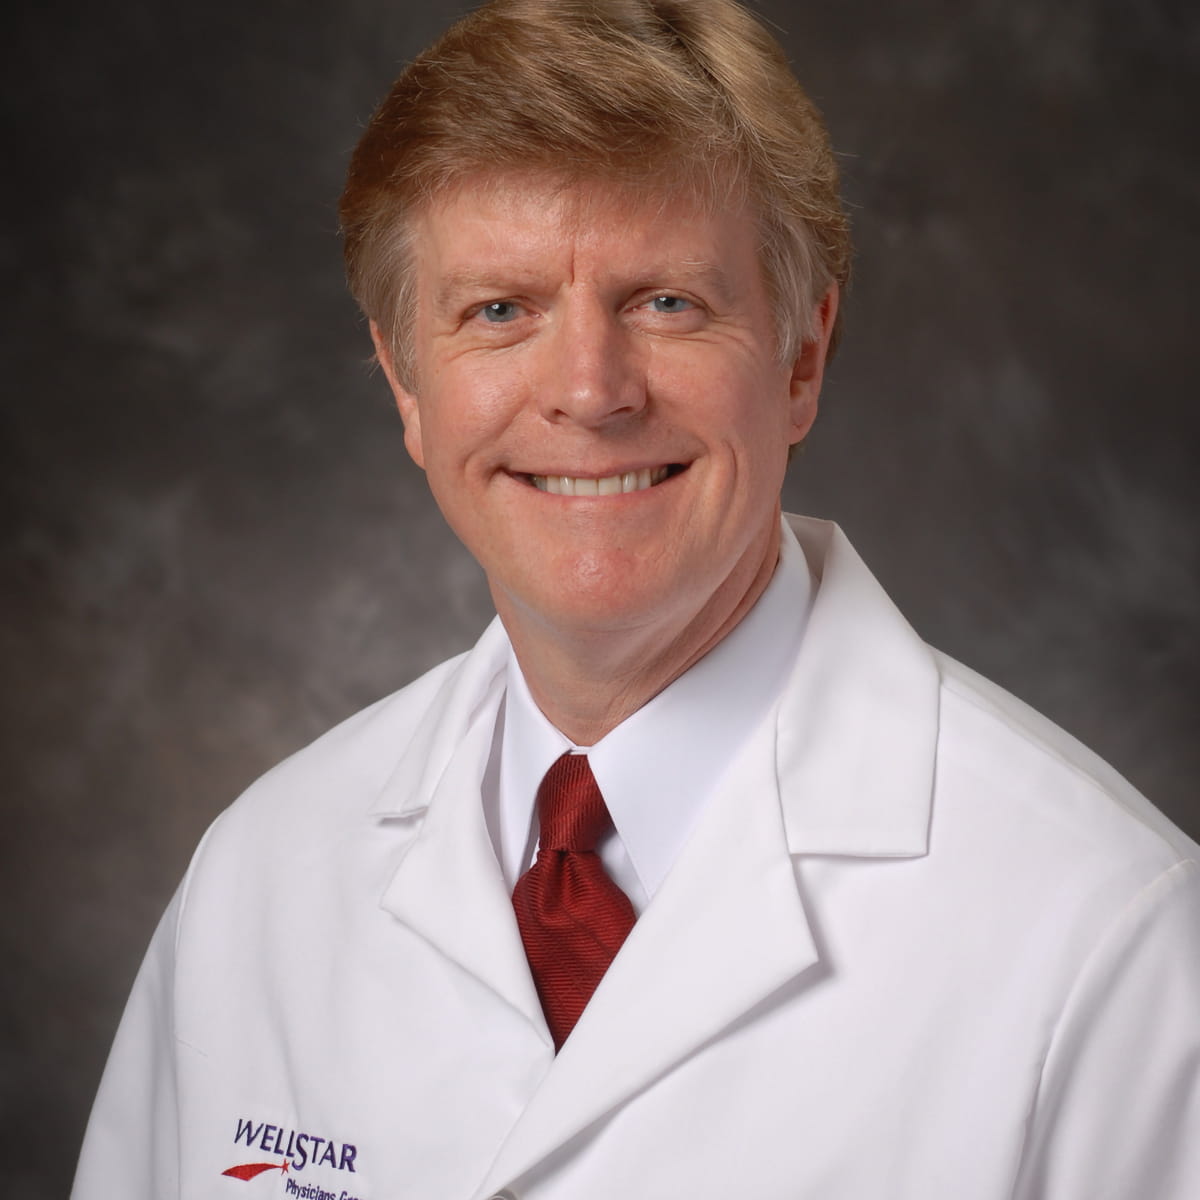 A friendly headshot of Larry Clements, MD